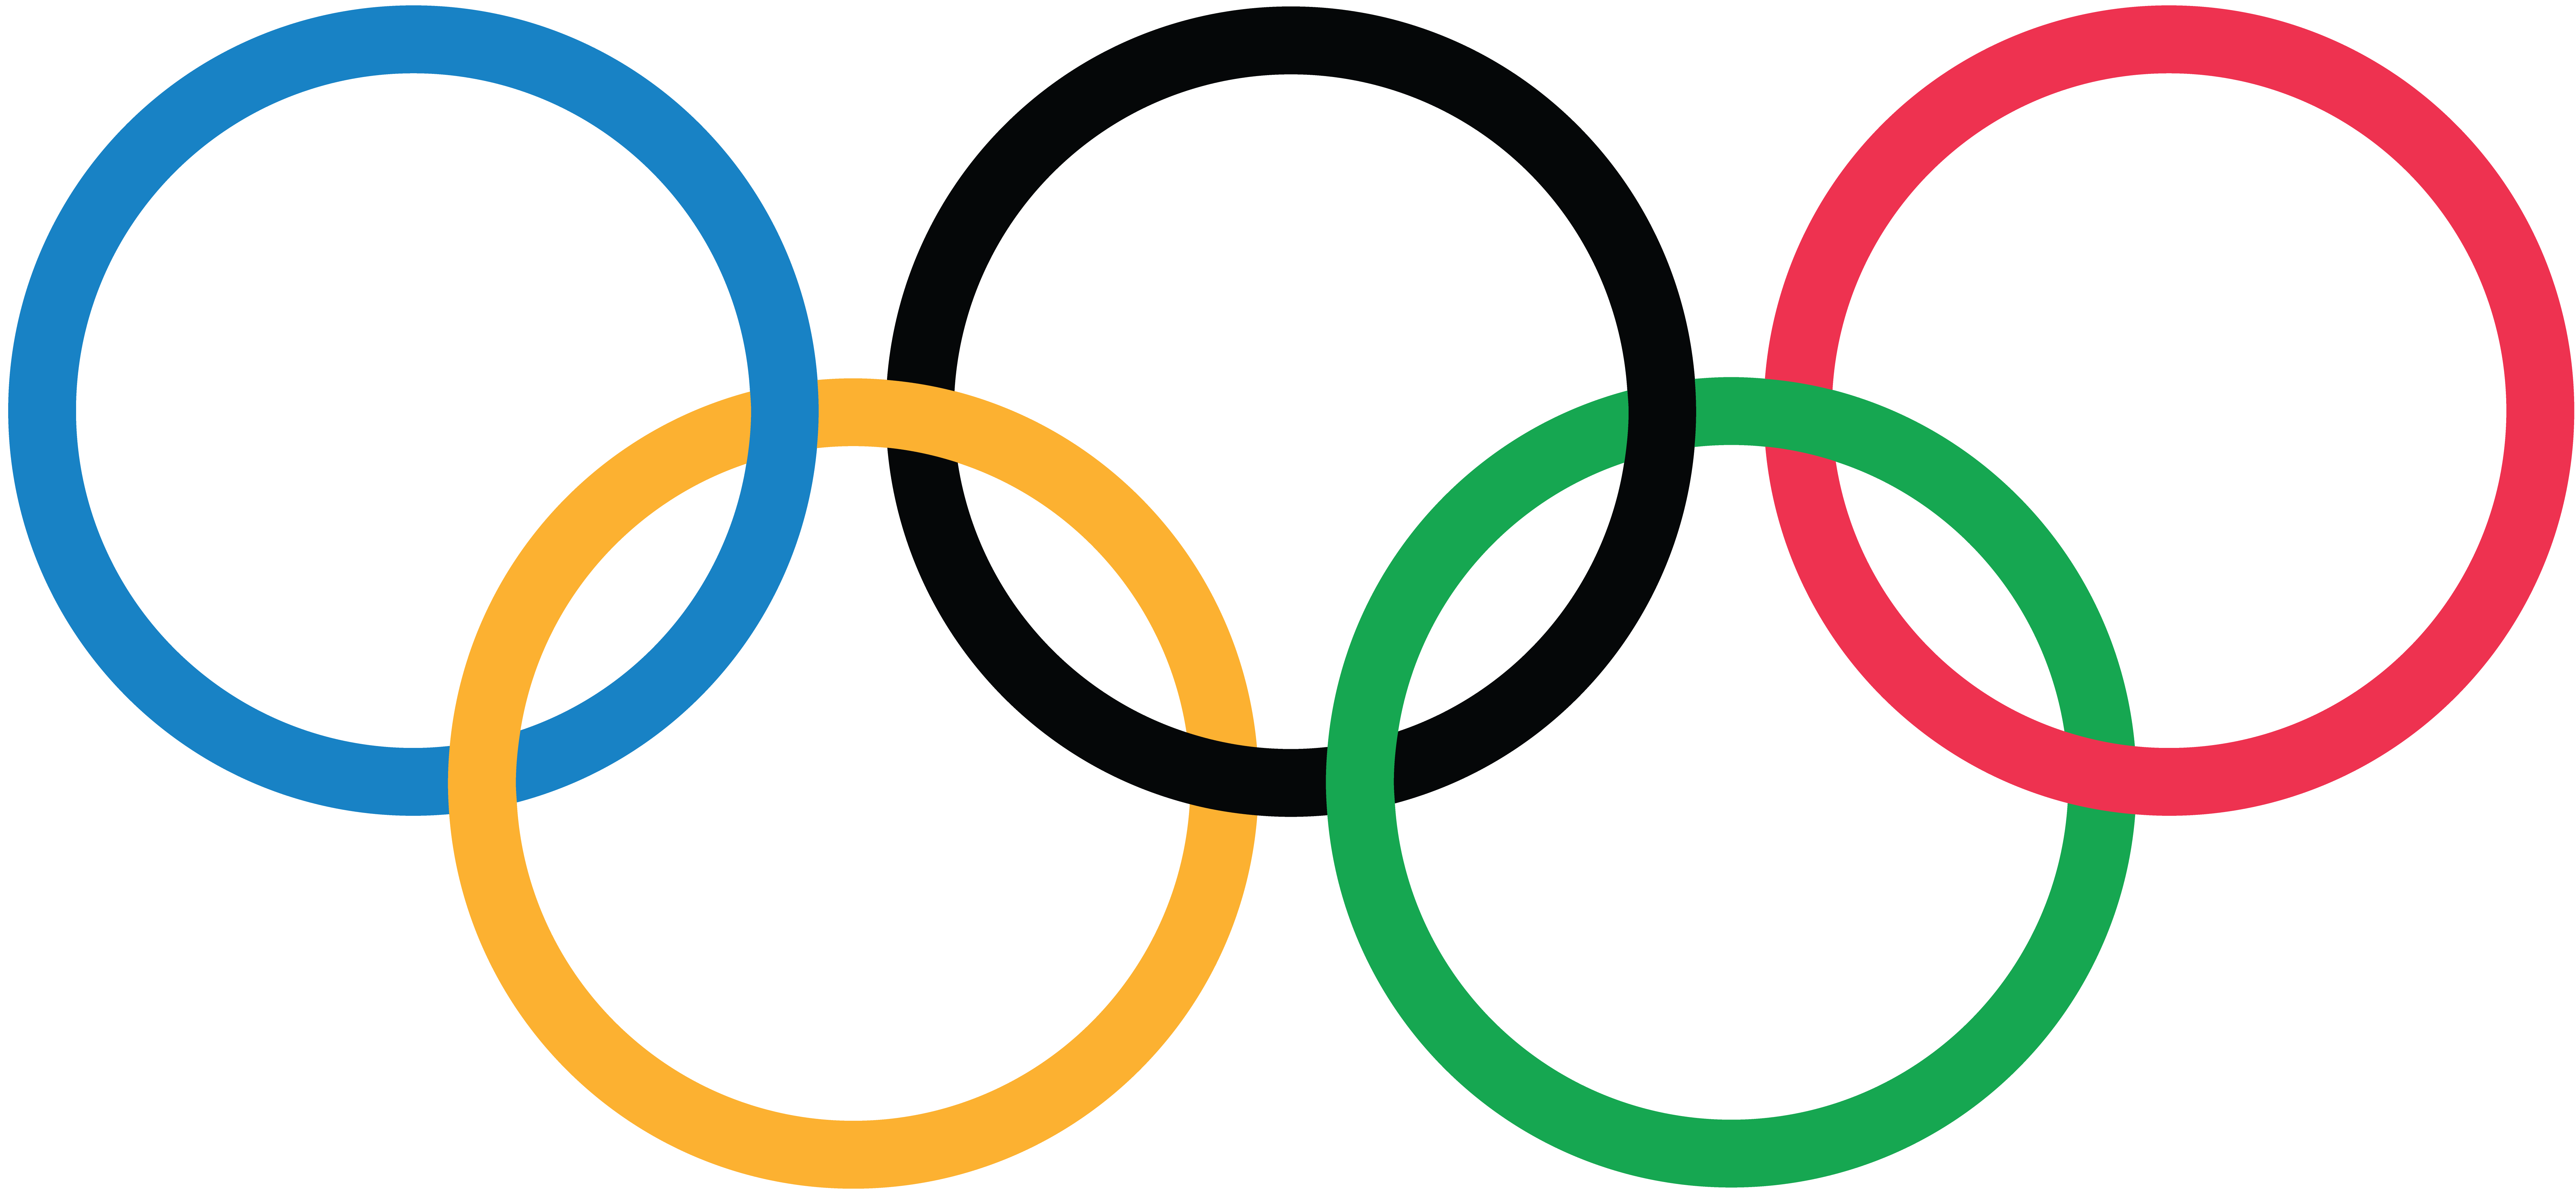 Olympic Games Clipart Olympic Rings #5 - Olympic Rings, Transparent background PNG HD thumbnail